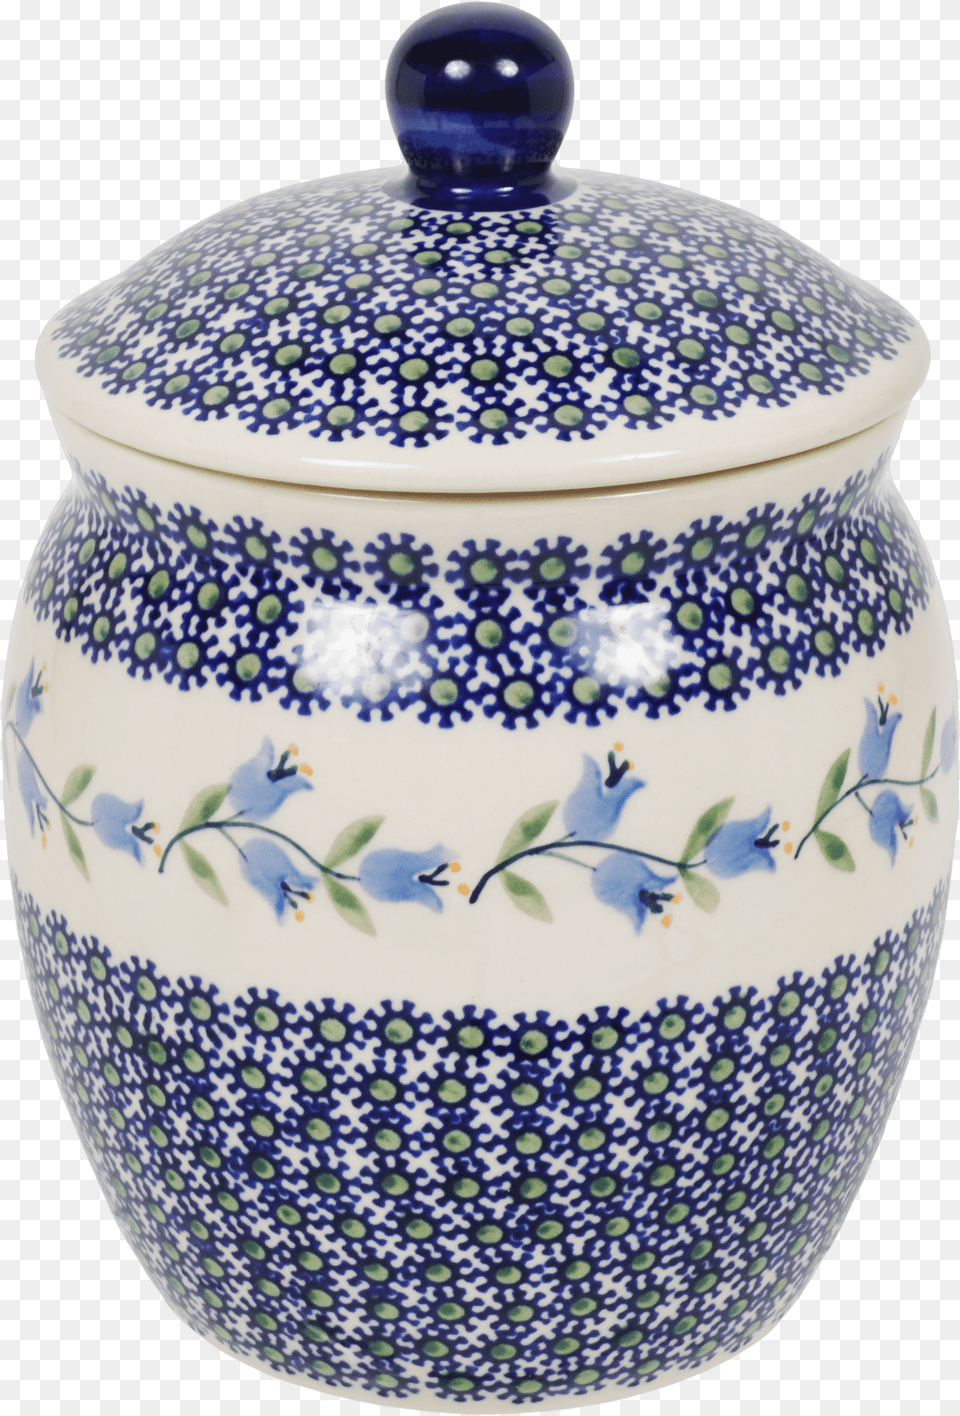 Liter Canisterclass Lazyload Lazyload Mirage Primary Blue And White Porcelain, Art, Pottery, Jar, Urn Png